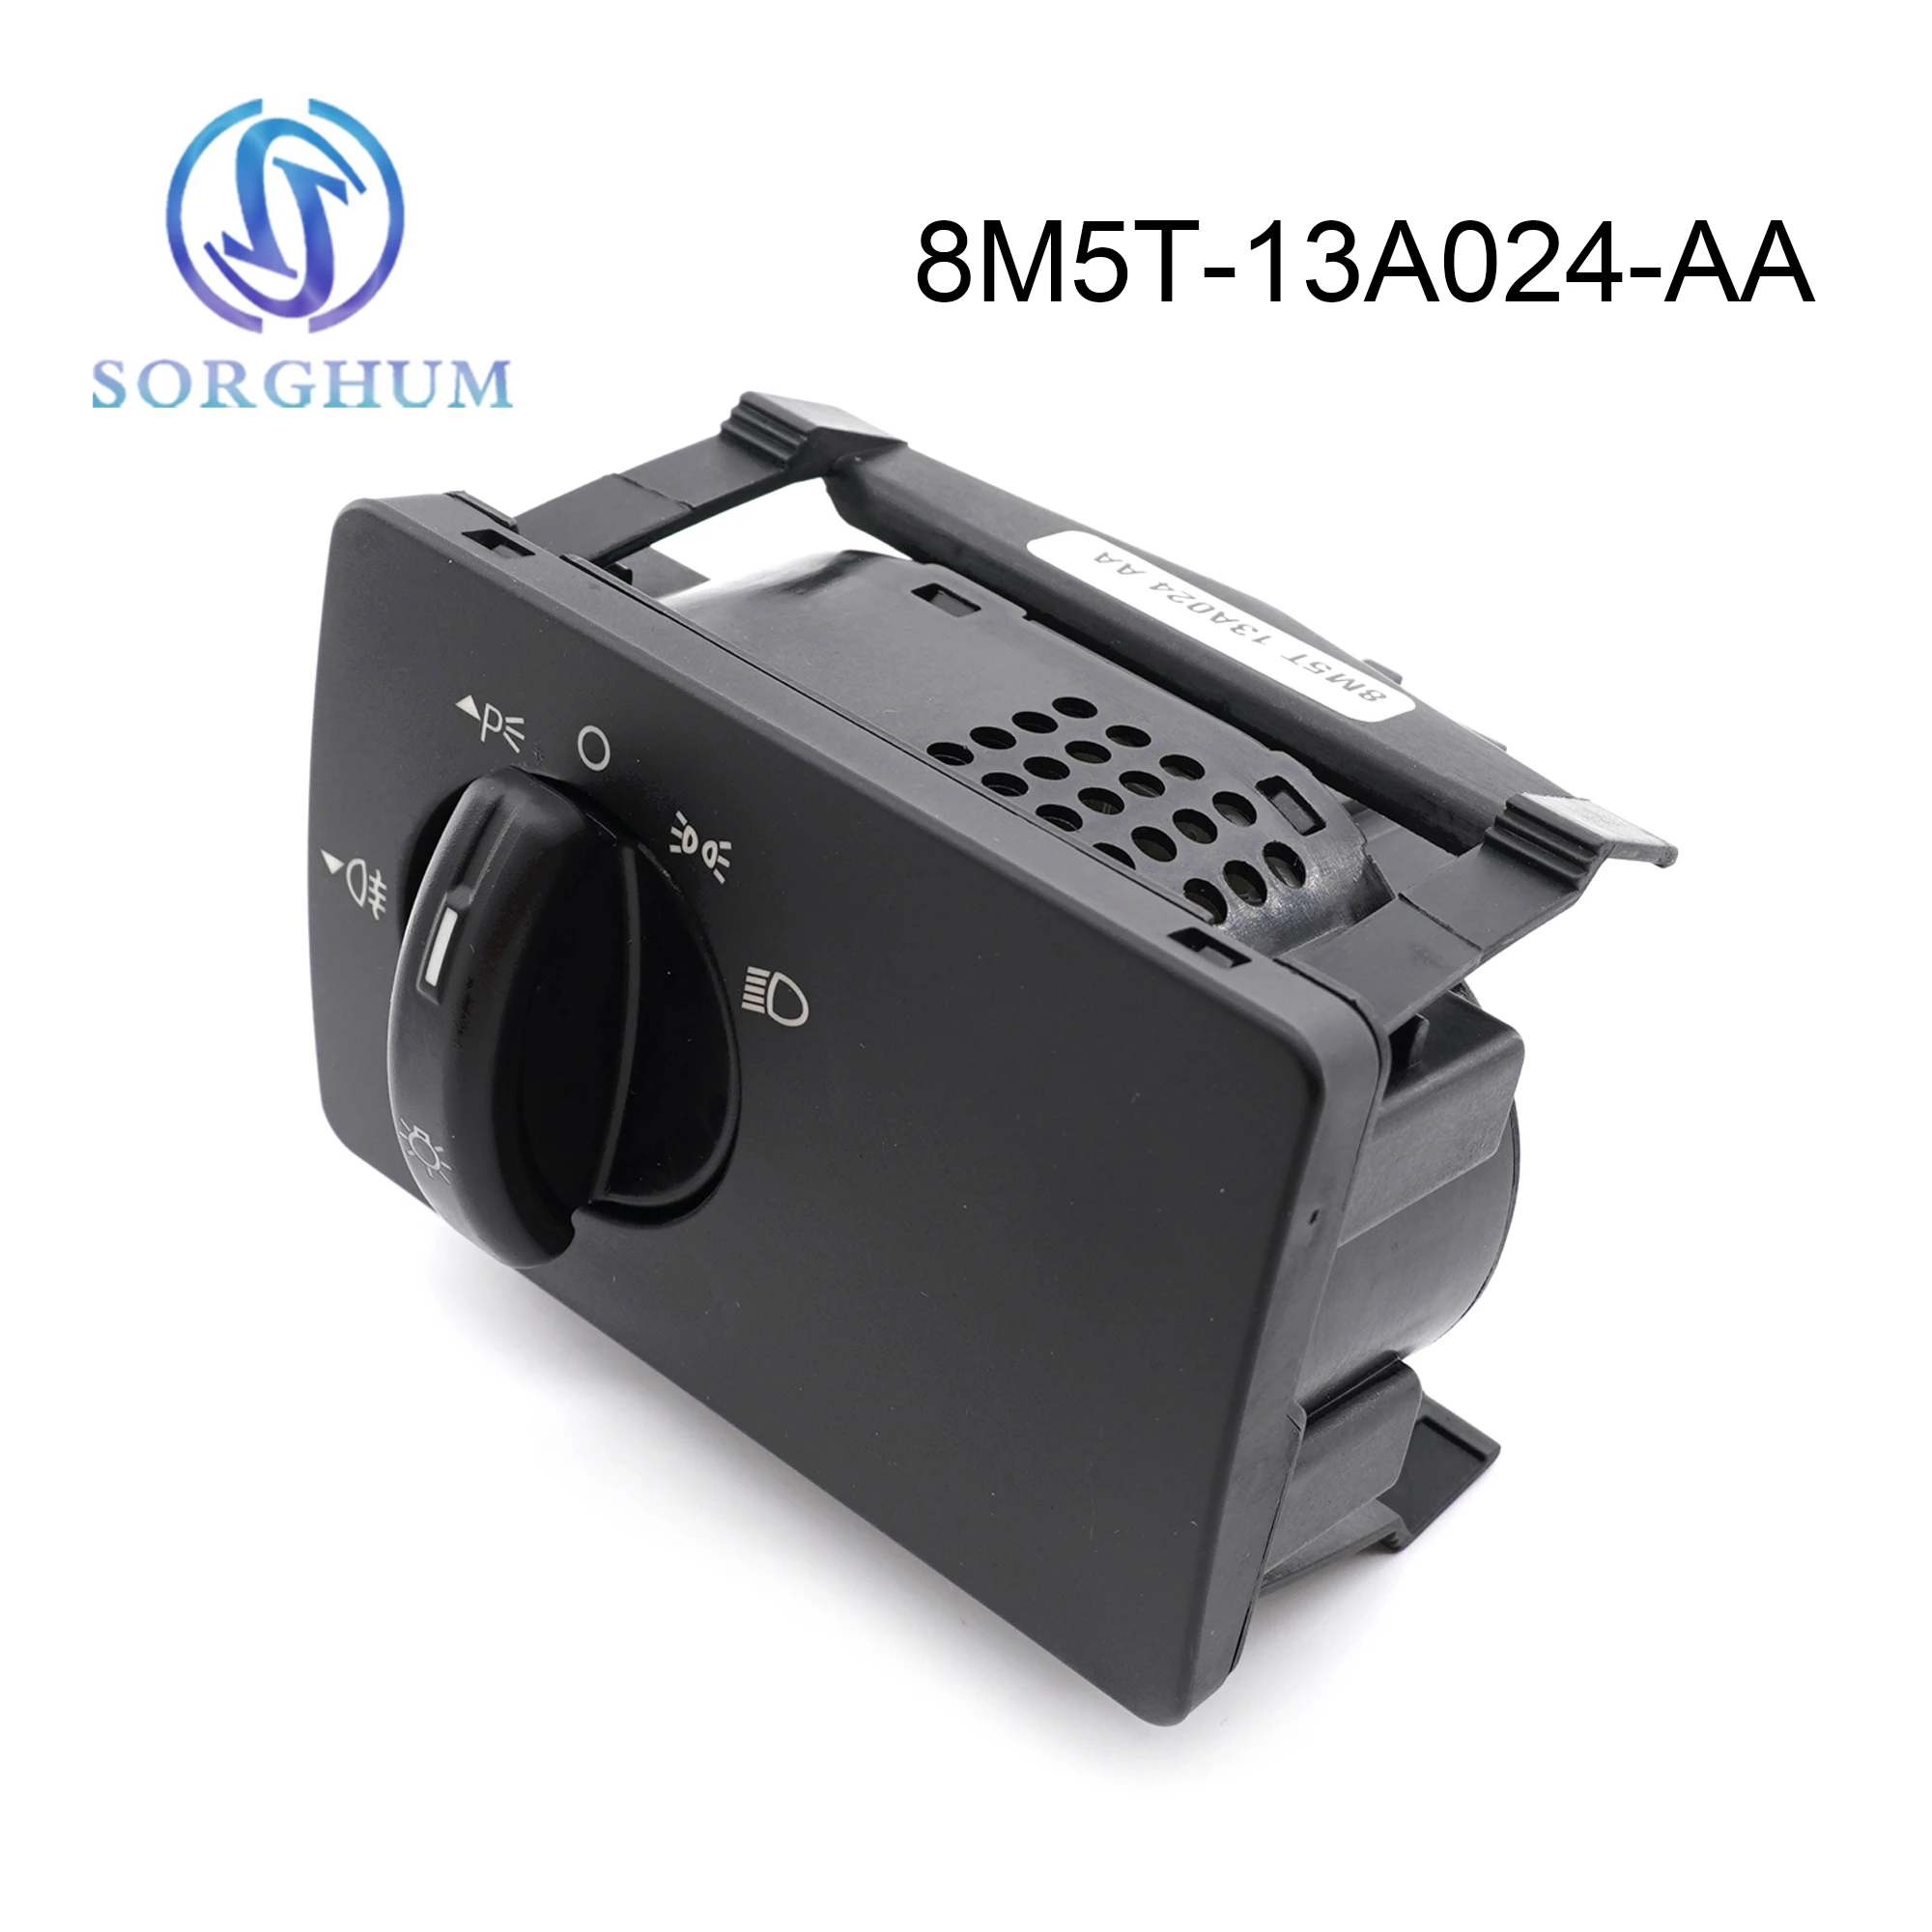 

Sorghum 8M5T-13A024-AA 8M5T13A024AA Car Styling Headlight Control Switch Head Fog Lamp Aadjuster Switch For Ford Focus II